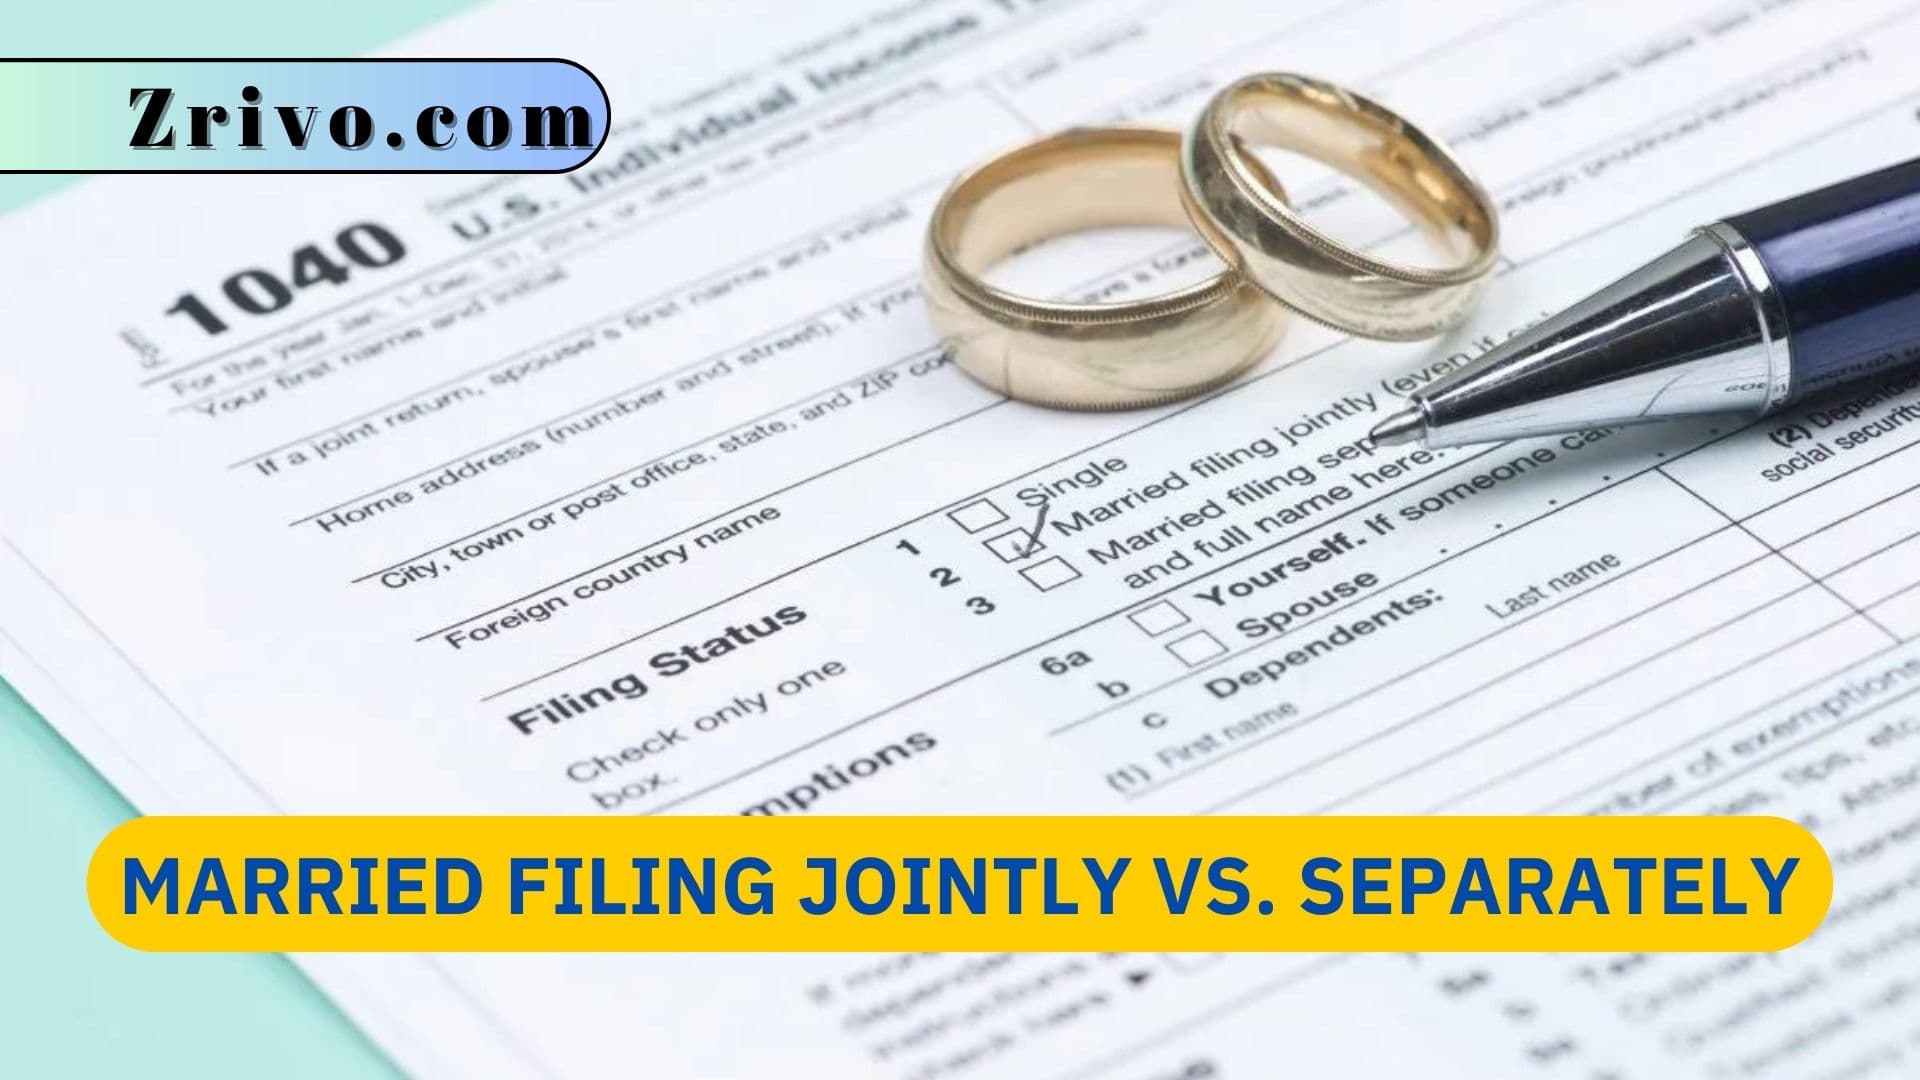 Married Filing Jointly vs. Separately